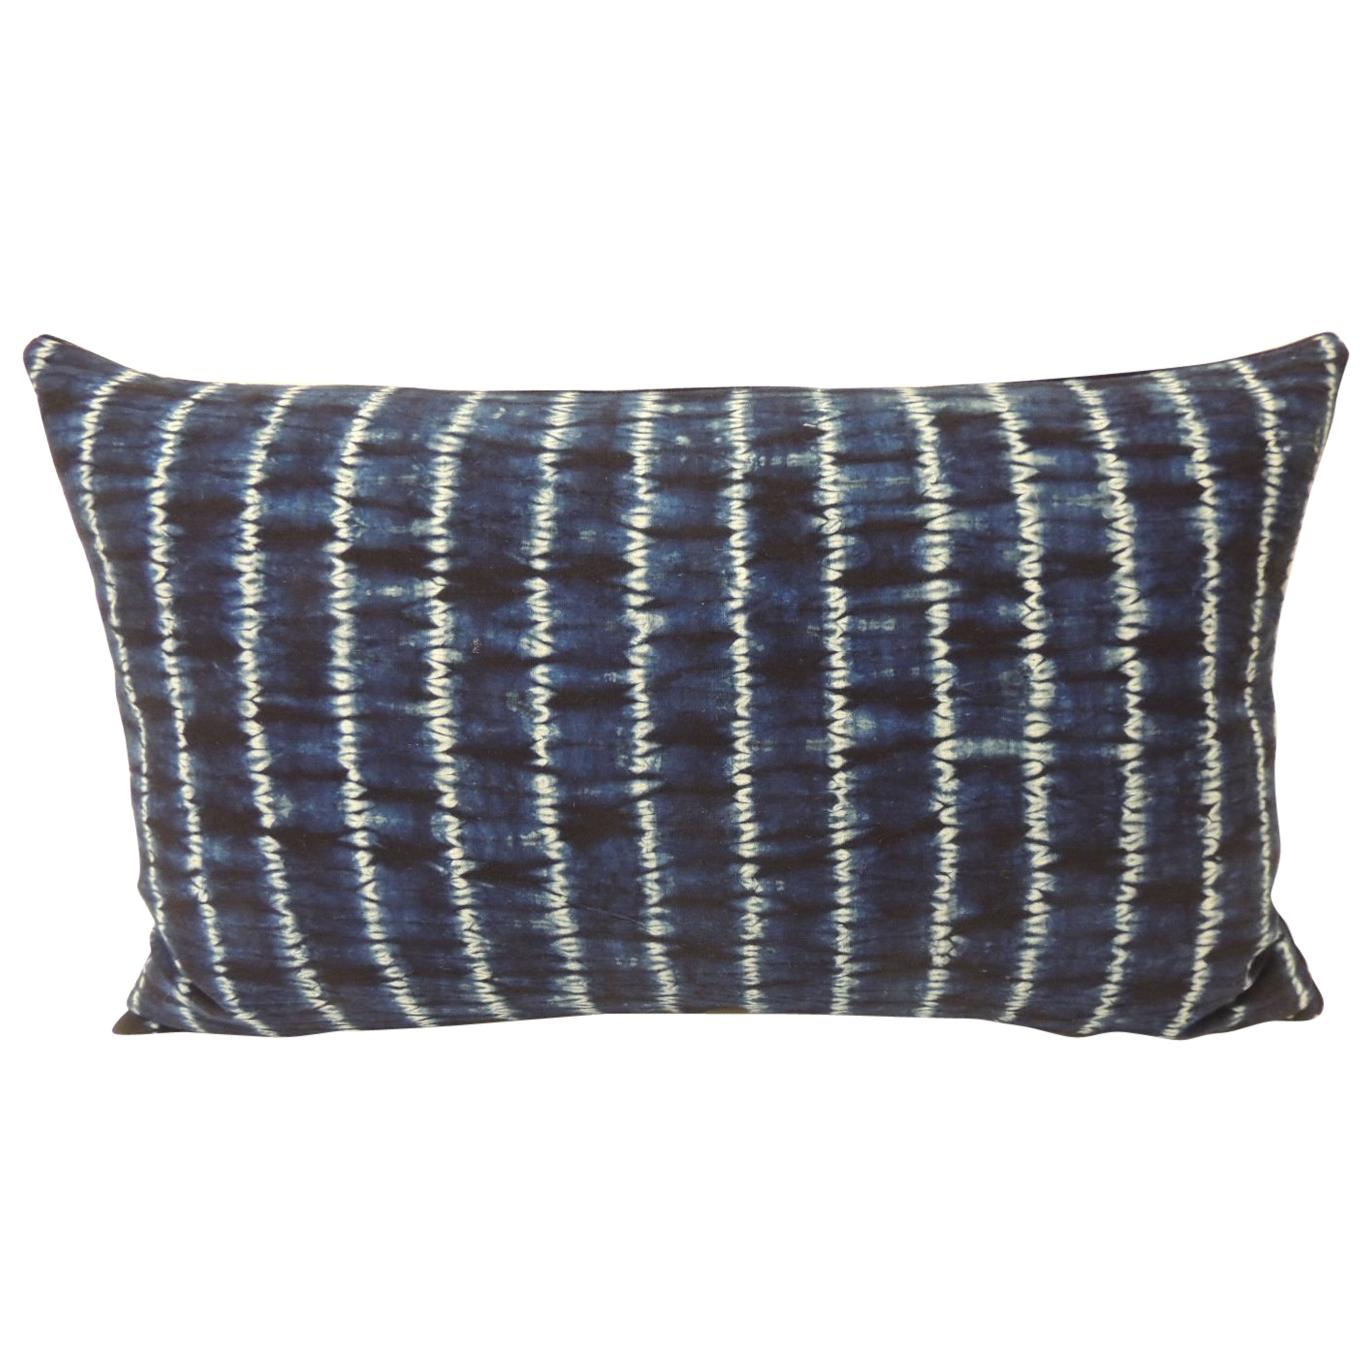 Vintage Indigo and White African Resist-dye Textile Decorative Pillow For Sale